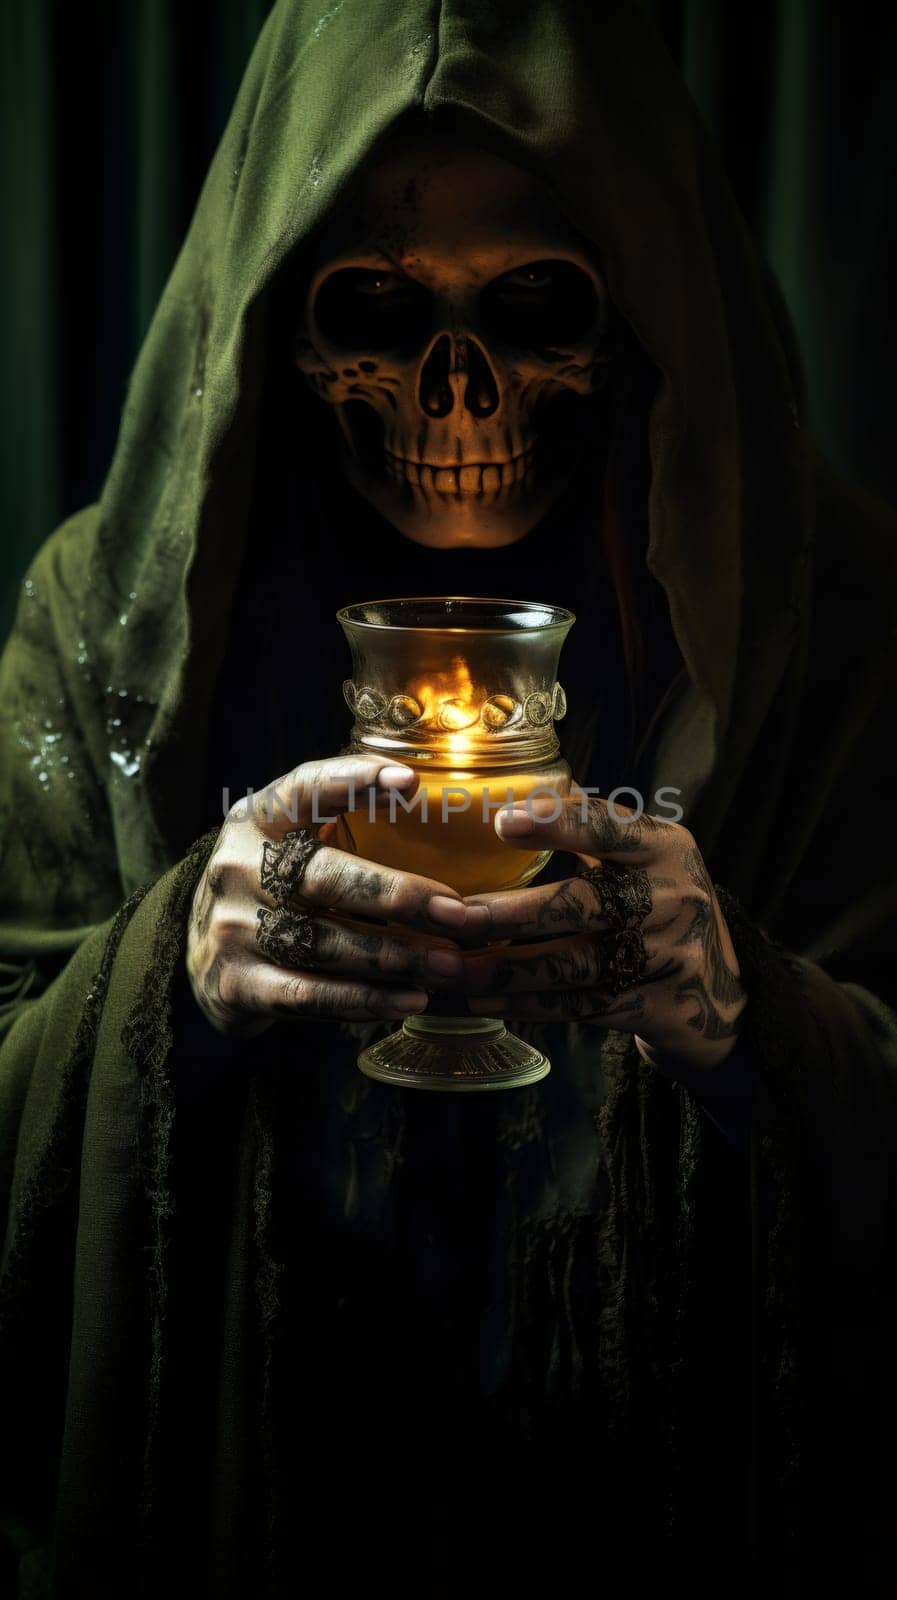 One man sorcerer in a skeleton mask, a green robe with a hood holds in his hands a vintage glass with a candle burning in it, standing in a dark room and looking ominously at the camera, side view close-up.